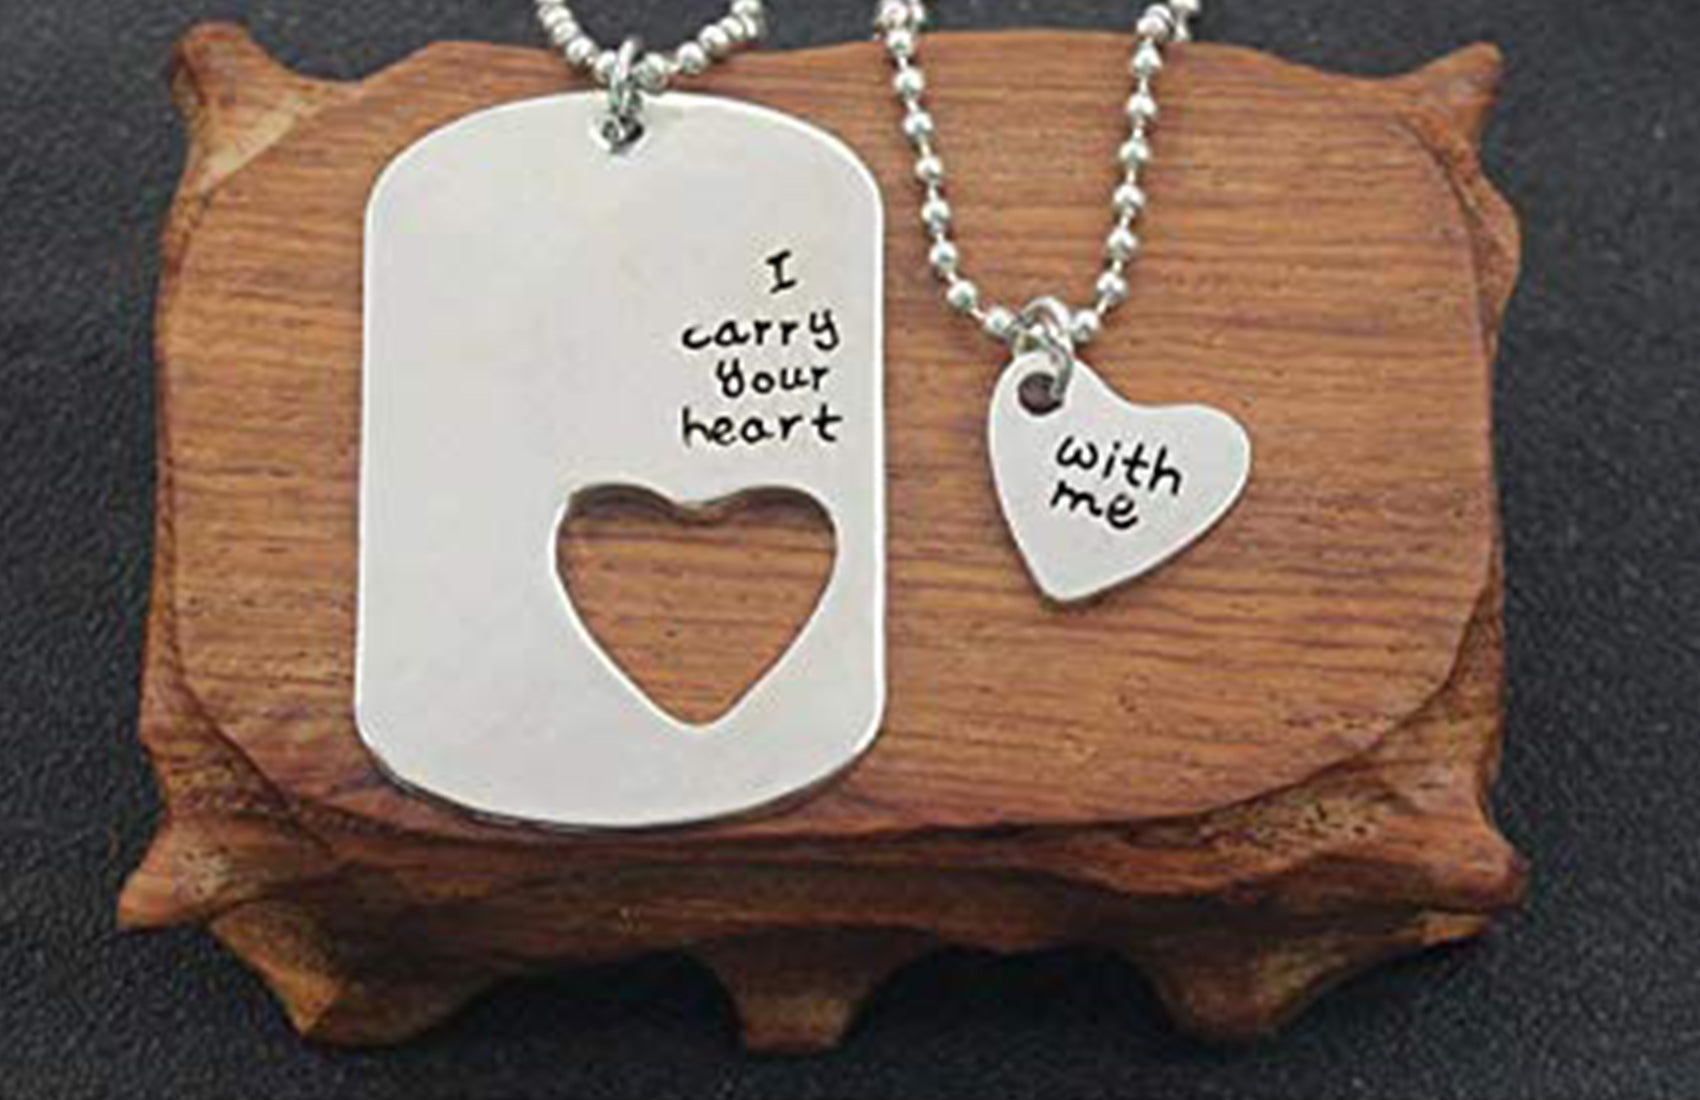 Long Distance Relationship I Carry Your Heart with Me Couple Pendant